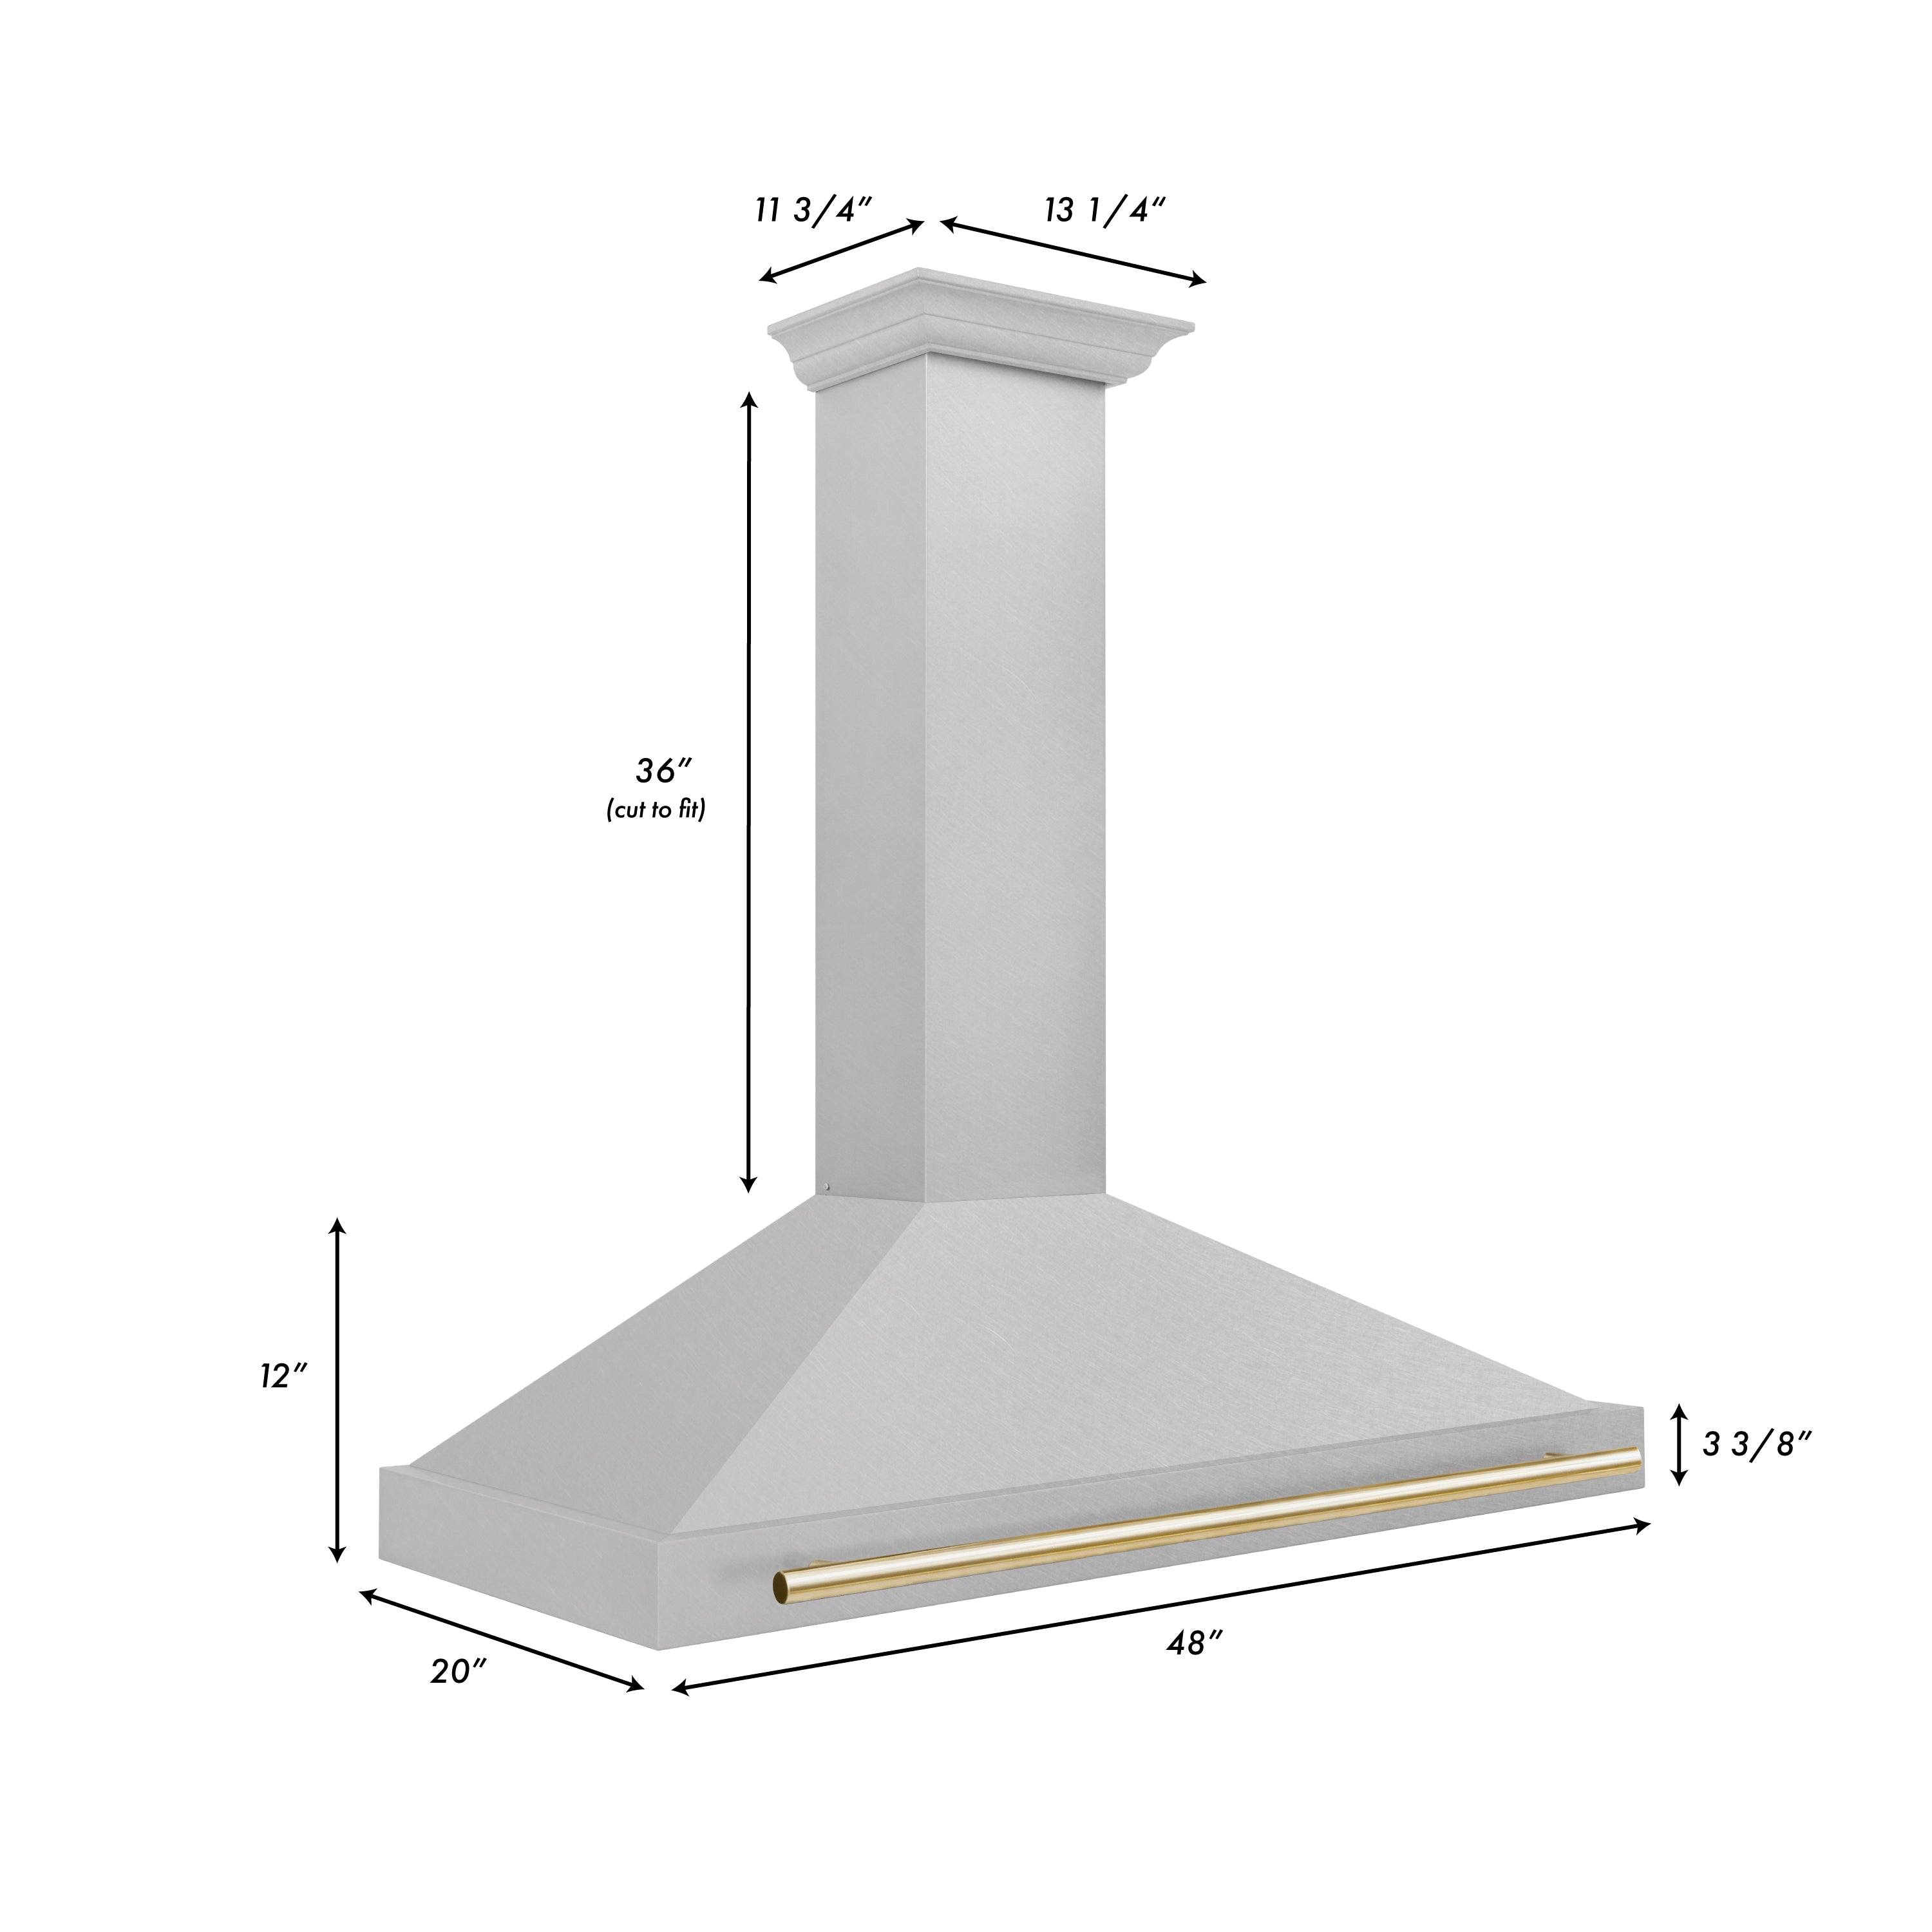 ZLINE 48 in. Autograph Edition DuraSnow Stainless Steel Range Hood with Polished Gold Accents dimensions.